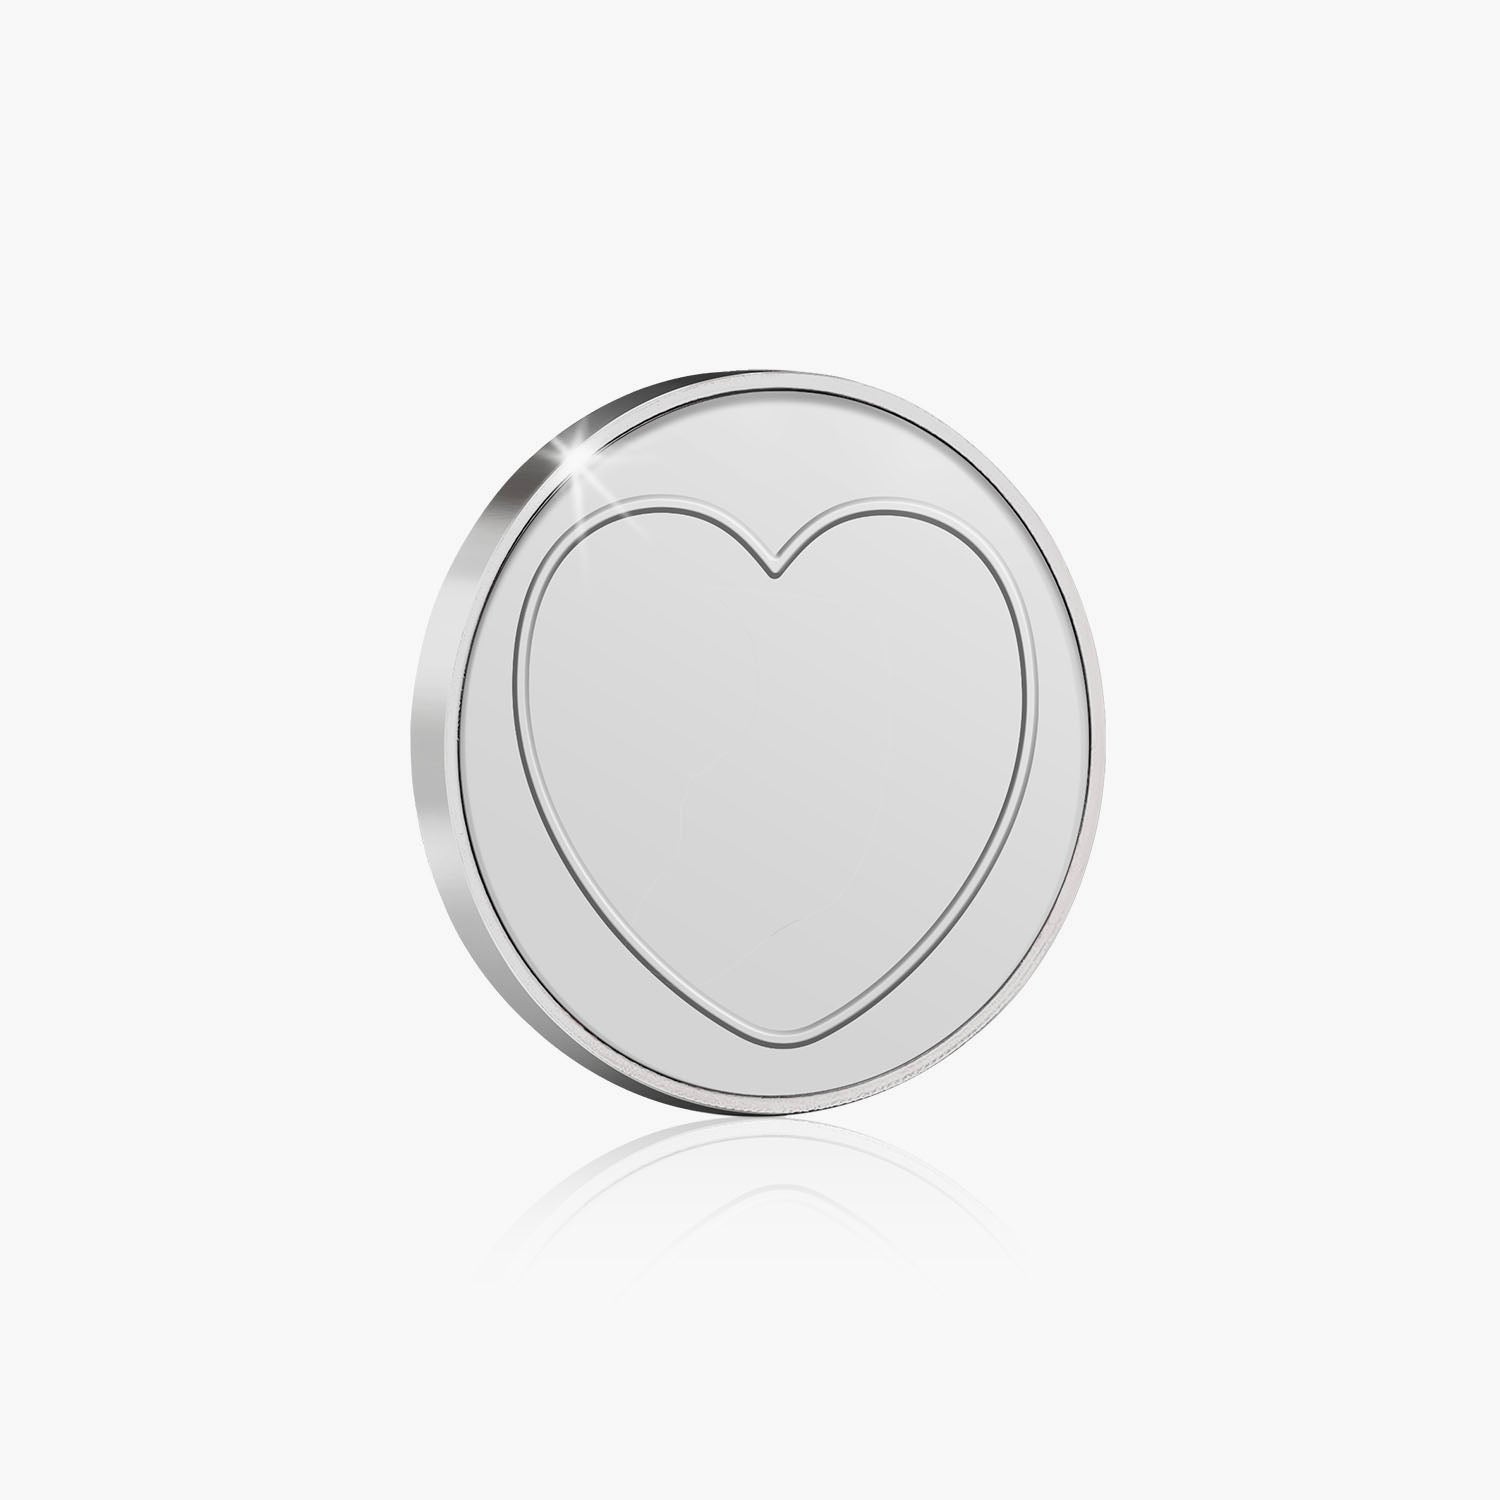 I Love You Silver Plated Love Heart in Presentation Box